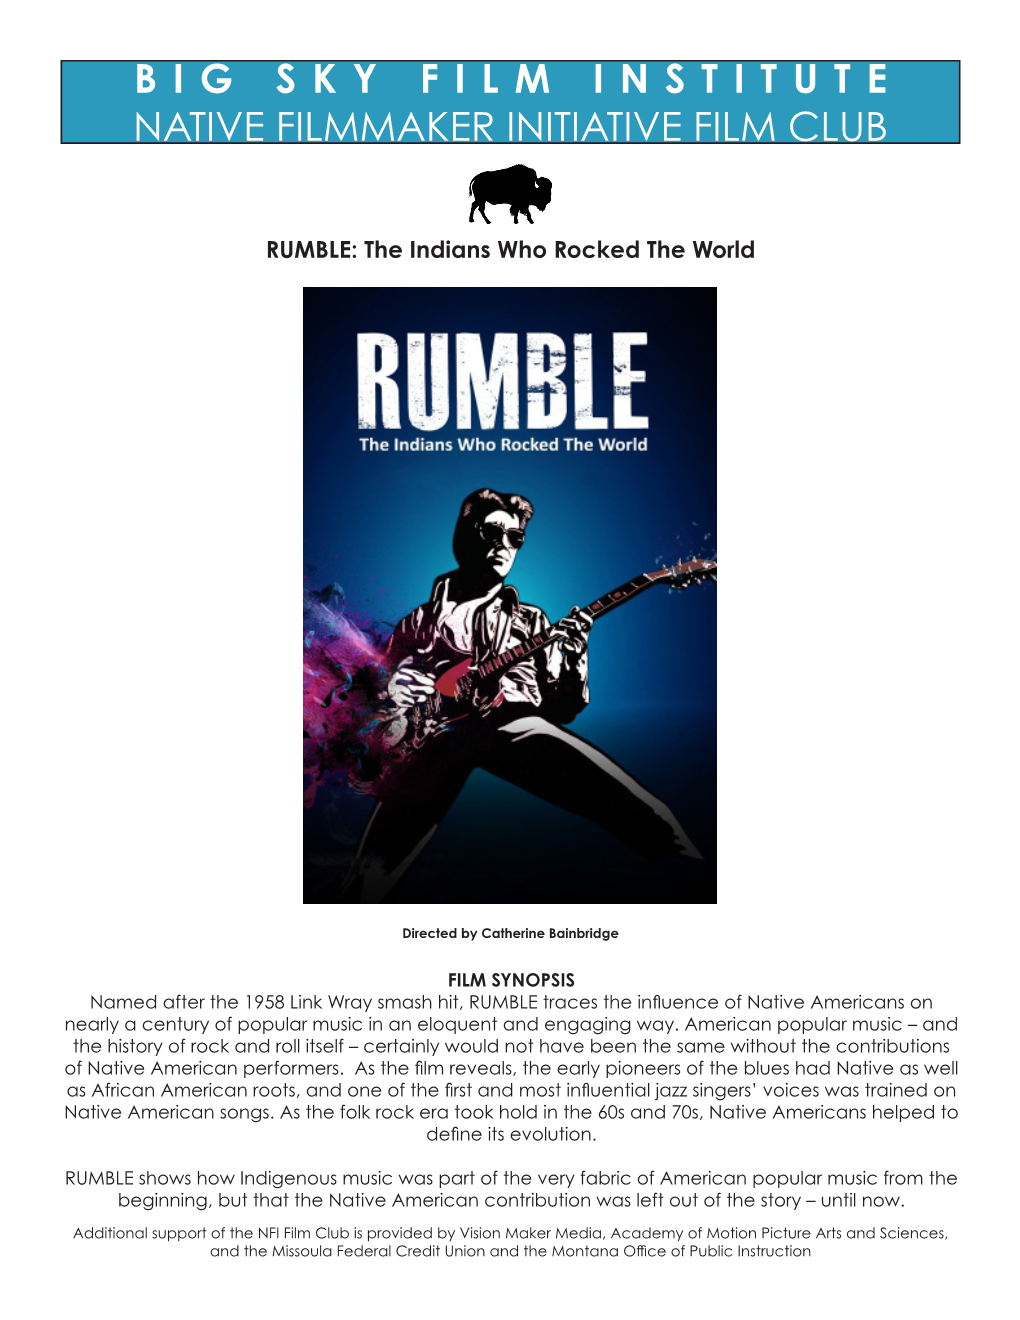 RUMBLE: the Indians Who Rocked the World